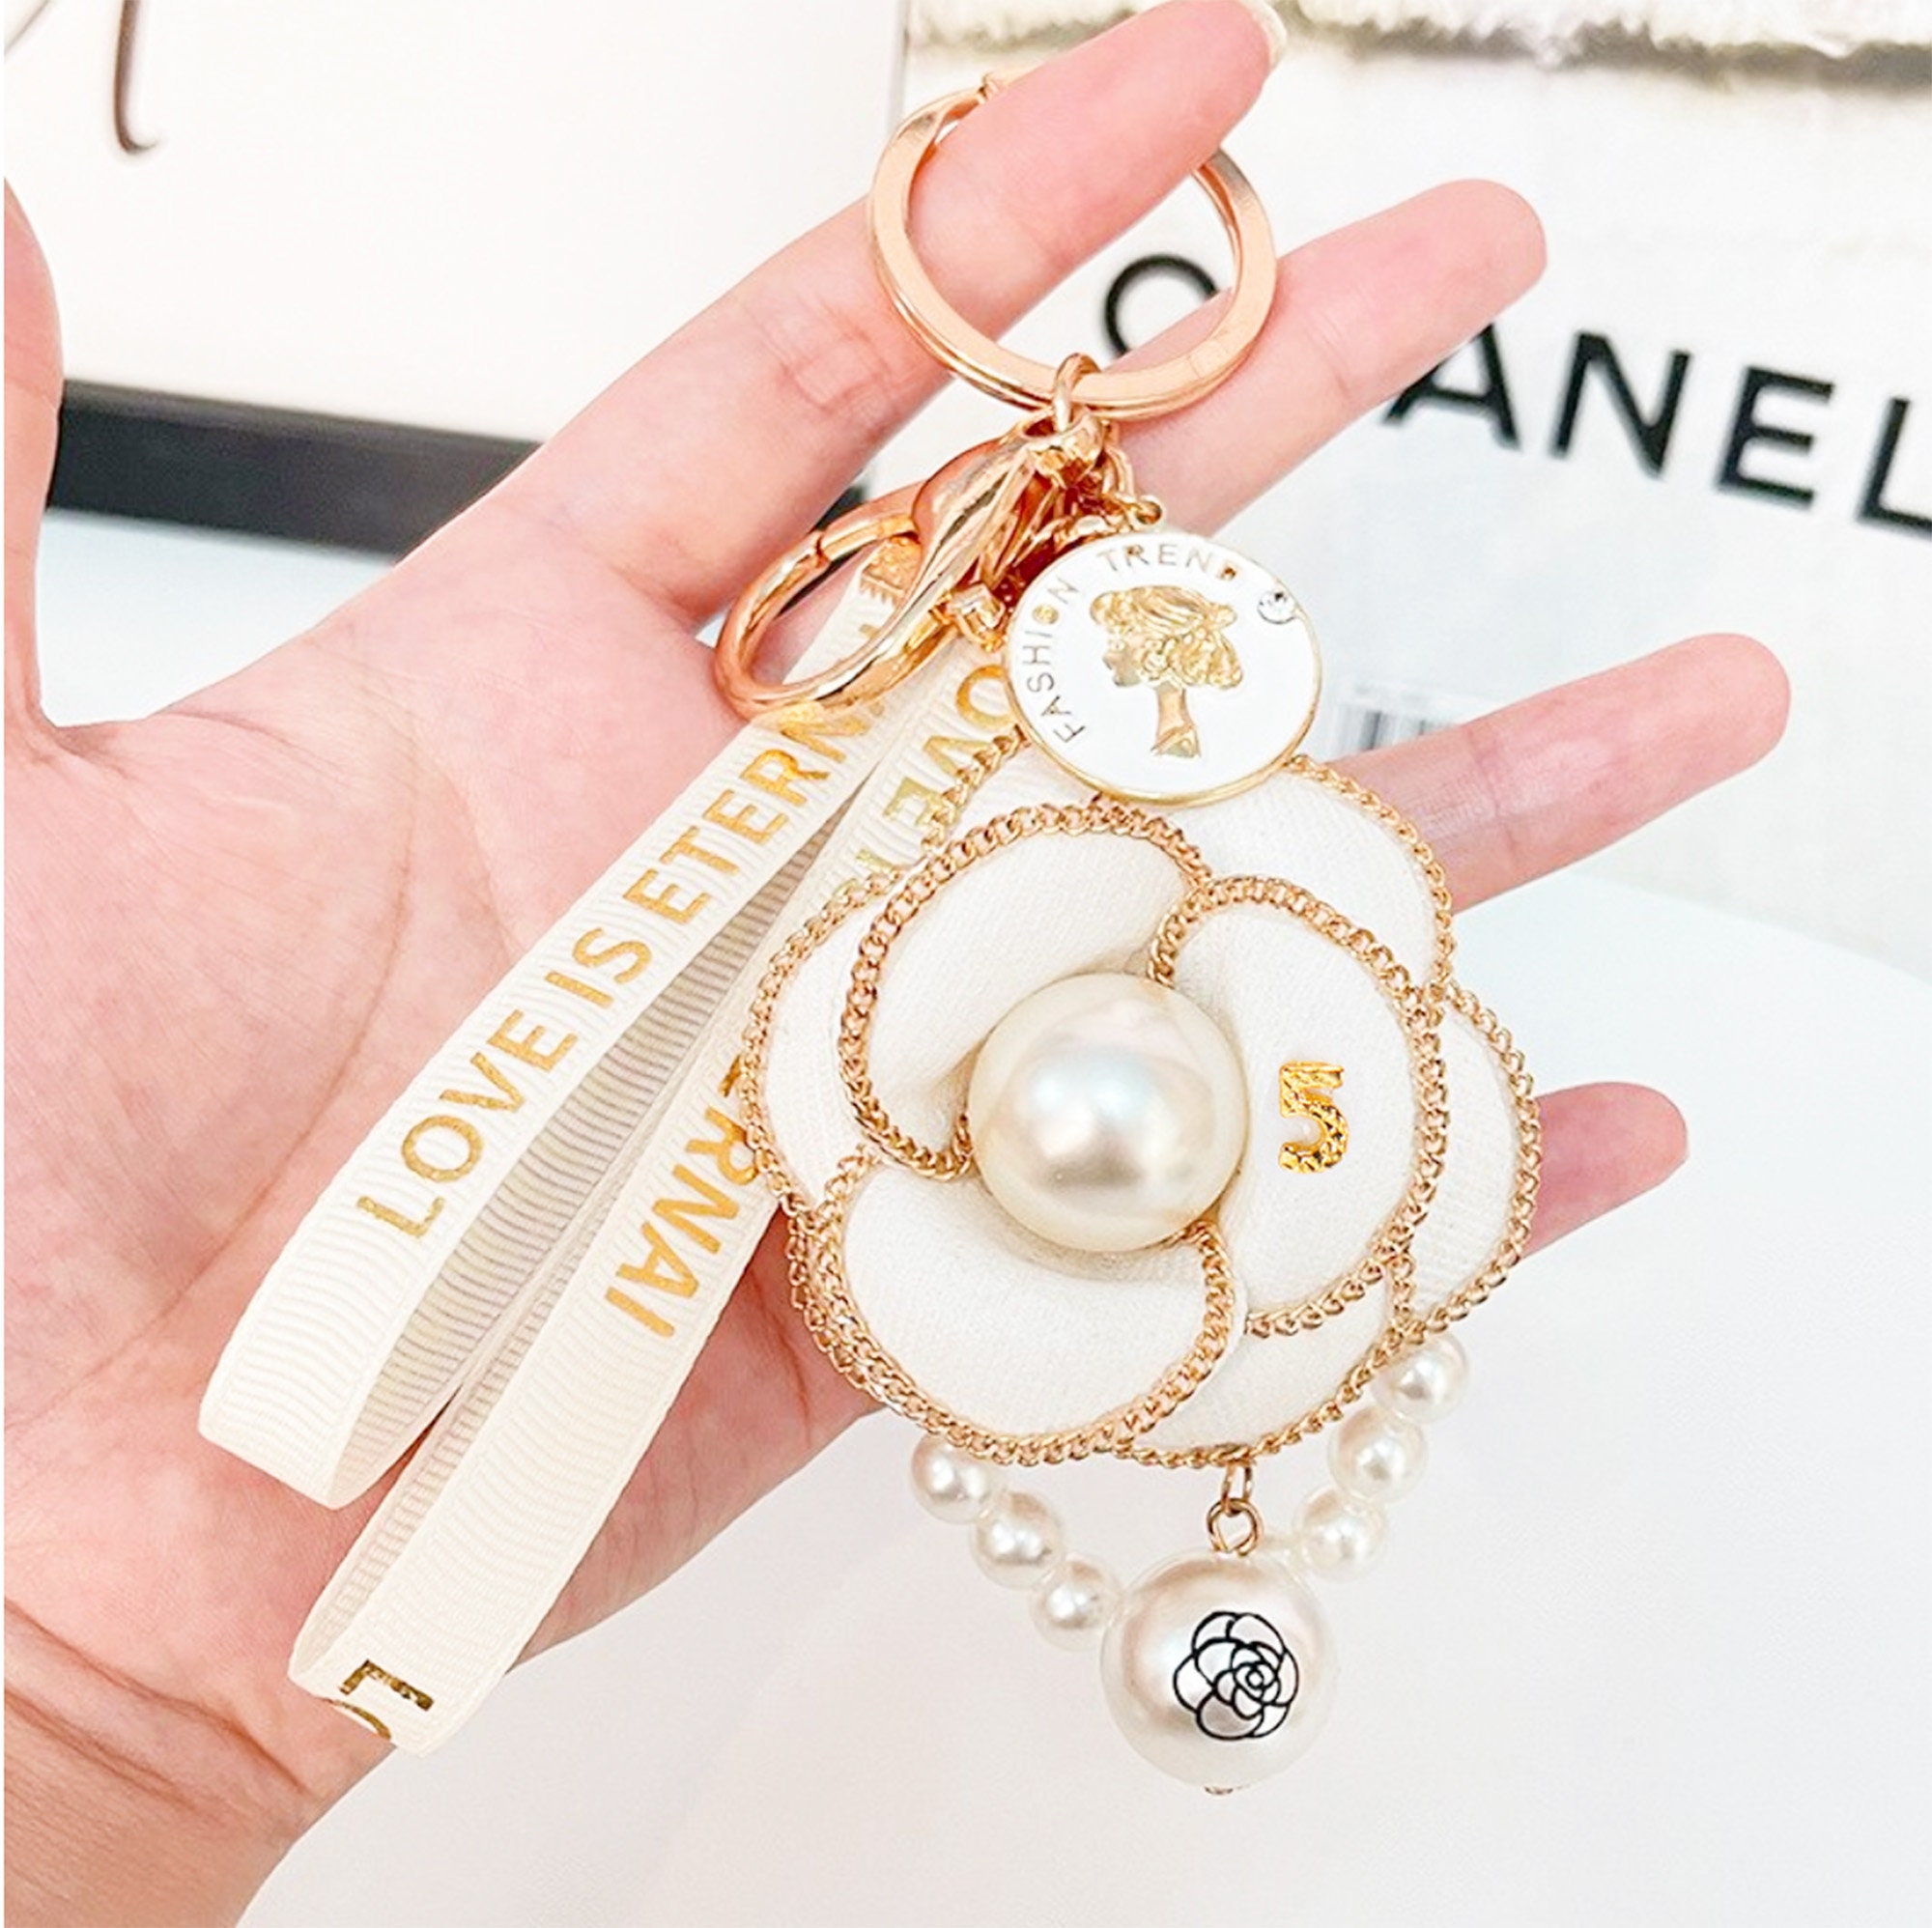 Buy Chanel Key Chain Online In India -  India